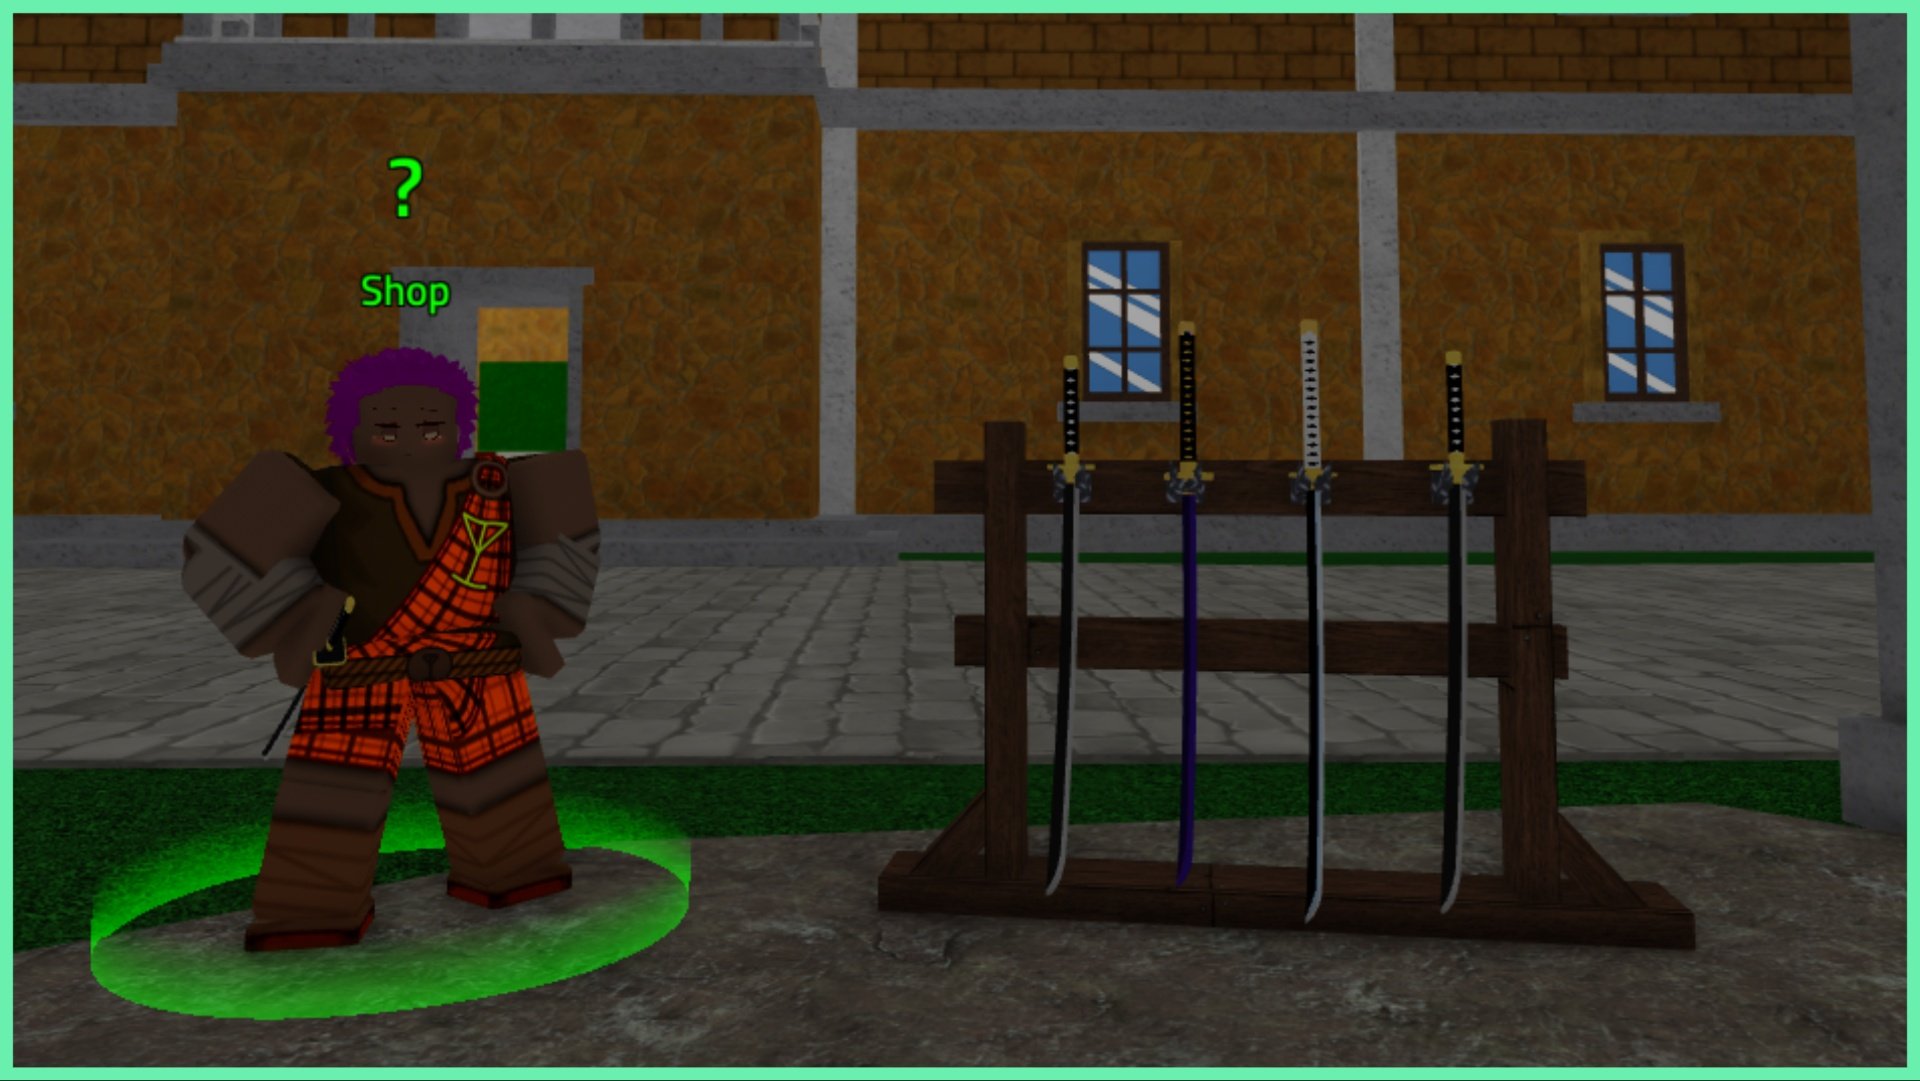 Feature image for our King Legacy Sword Tier List which shows a shopkeep beside a standee of various unsheathed swords